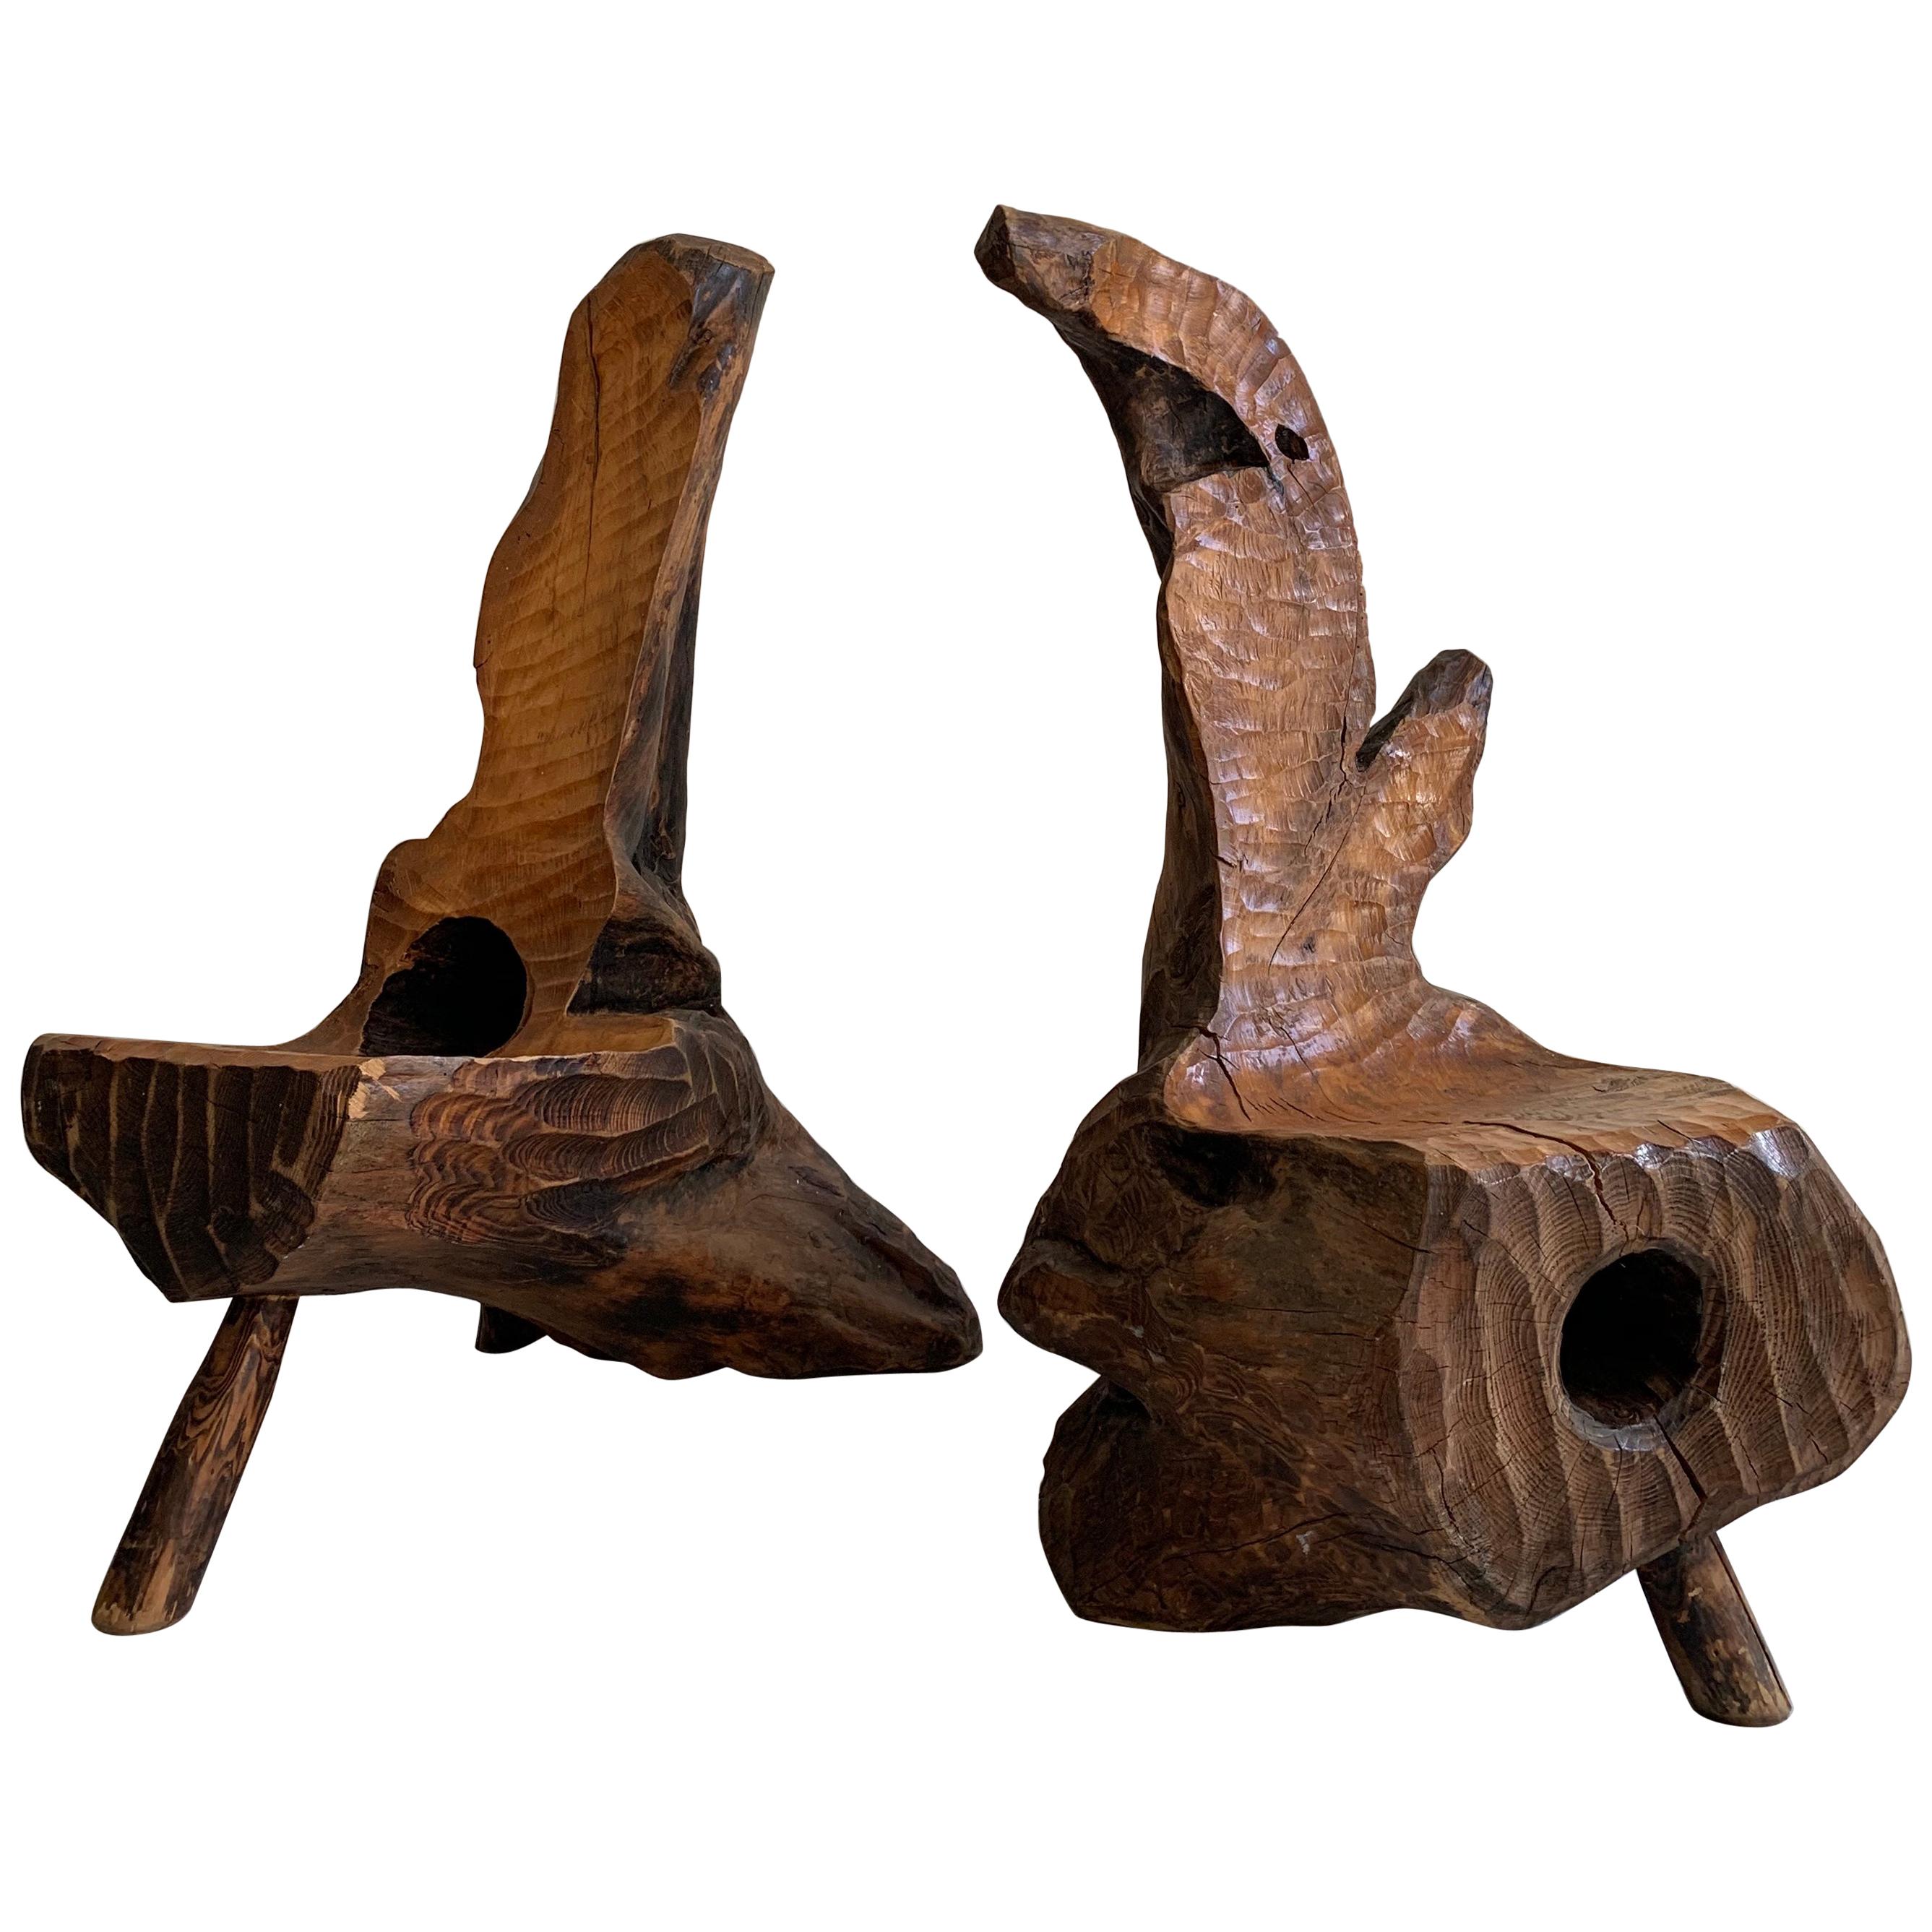 Pair of Swedish Sculptural and Brutalist Hand Carved Wooden Chairs